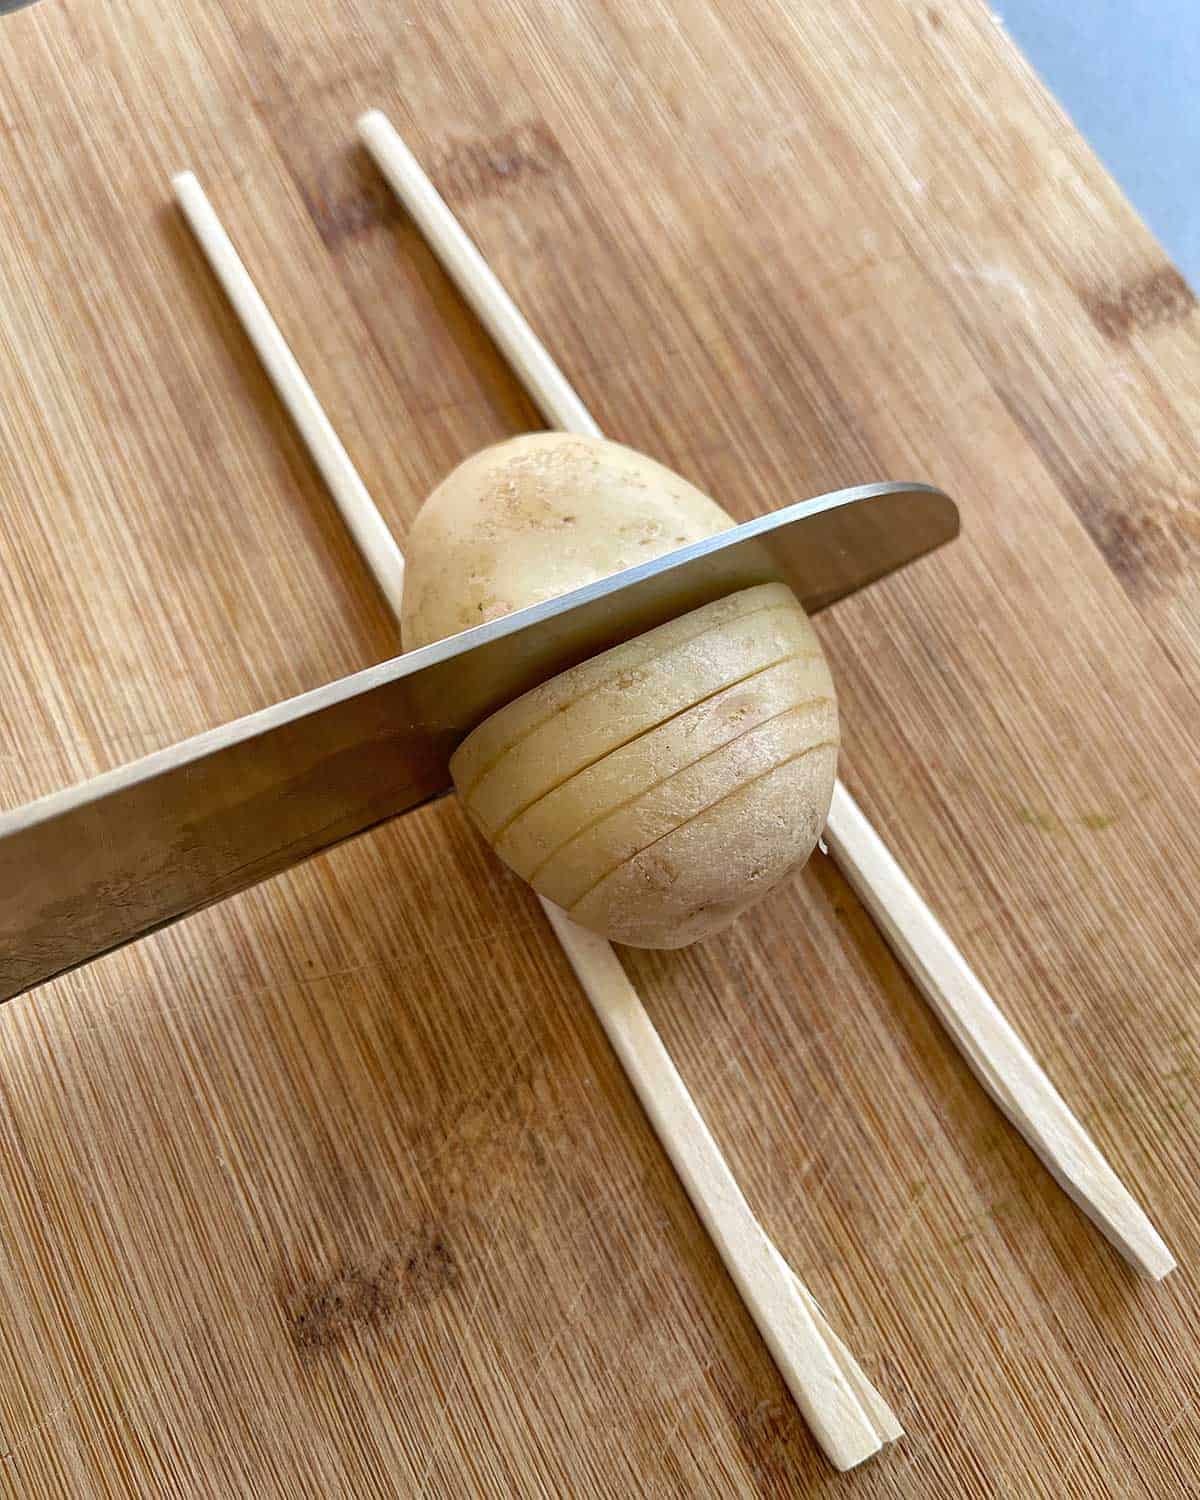 A potato being cut while sitting on two chopsticks.